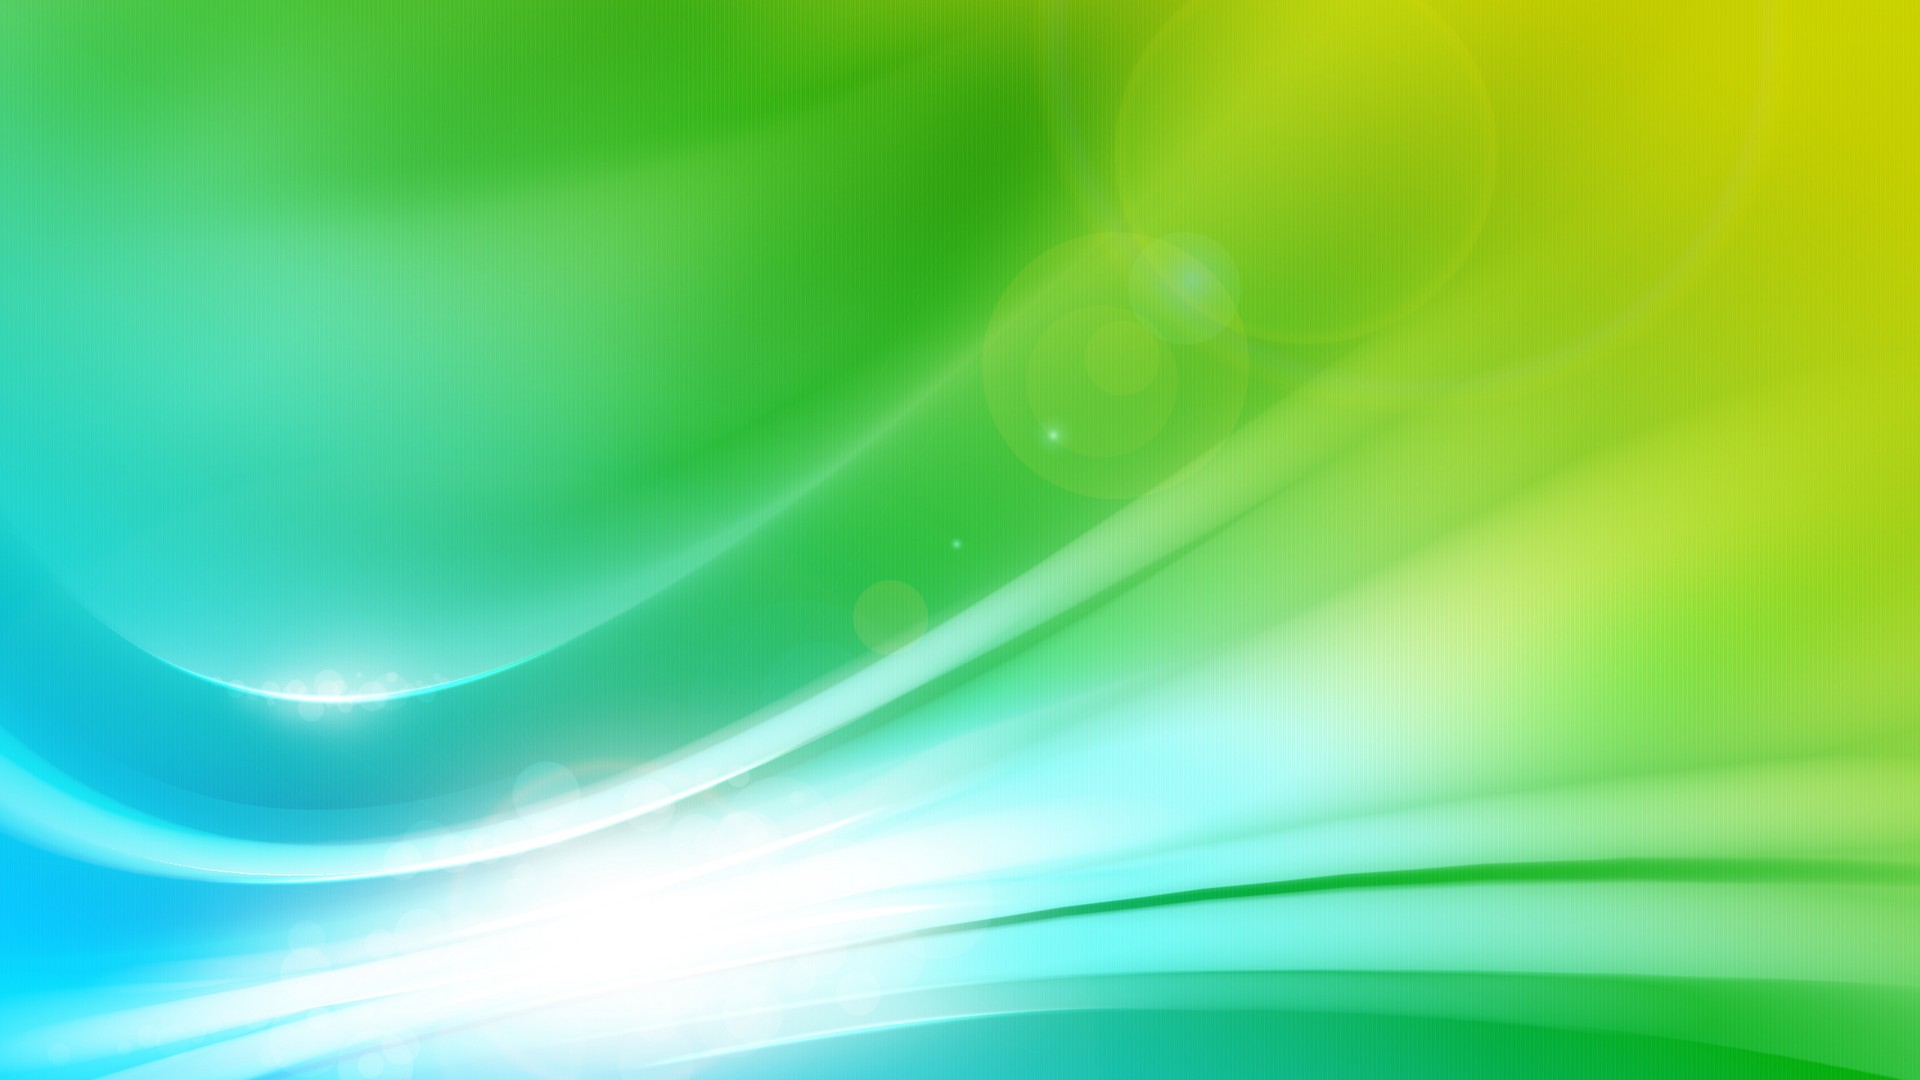 Light Green Desktop Backgrounds HD with resolution 1920X1080 pixel. You can use this wallpaper as background for your desktop Computer Screensavers, Android or iPhone smartphones